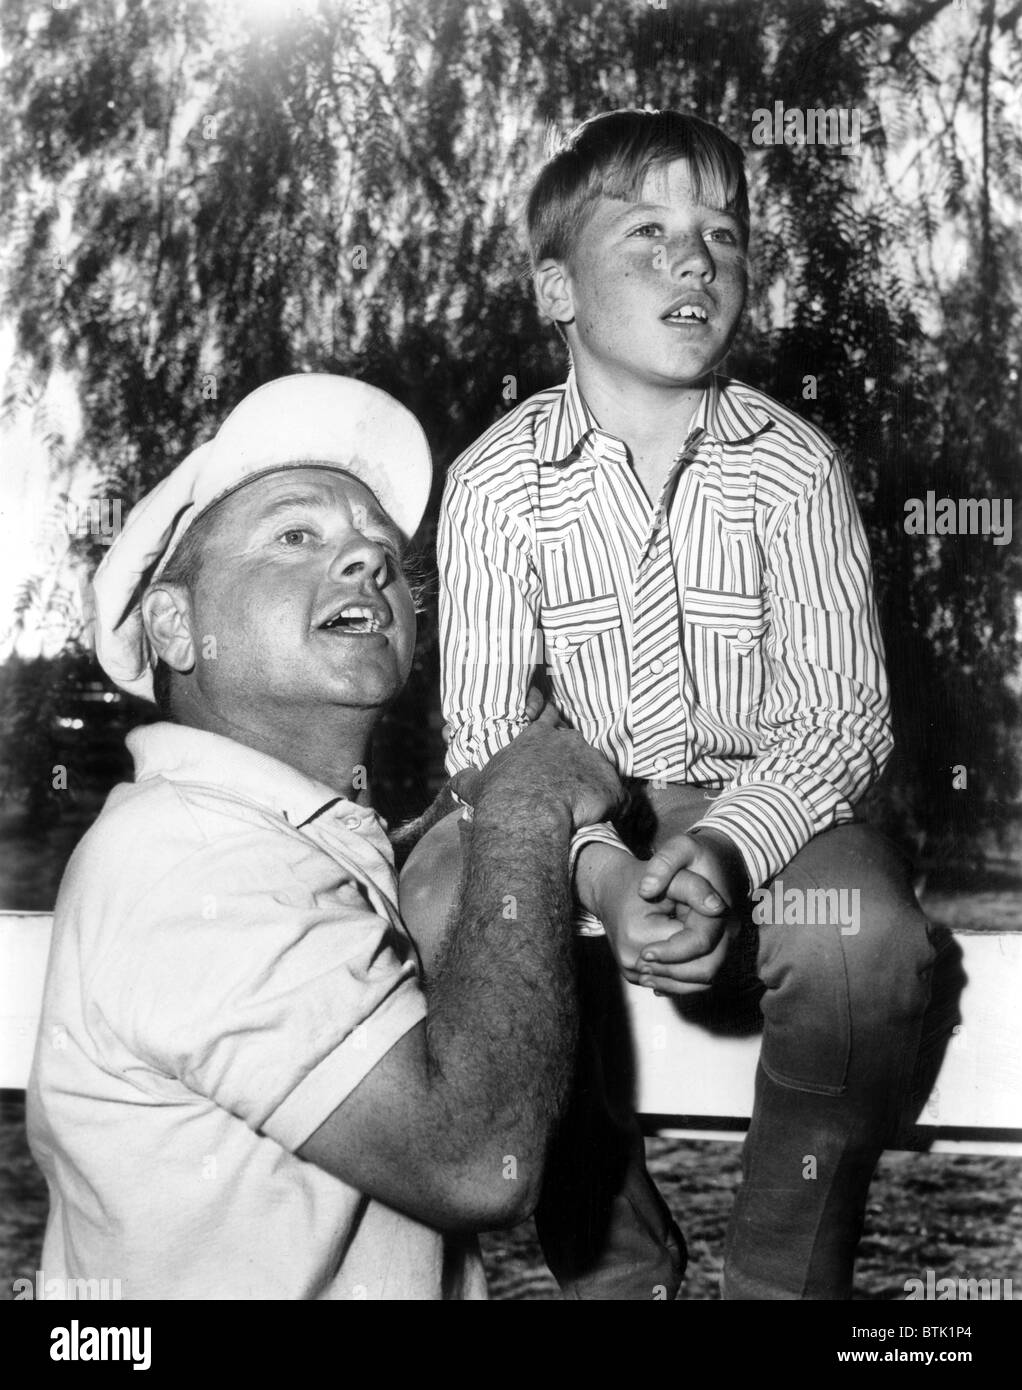 GENERAL ELECTRIC THEATER (Episode: The Money Driver, 1960), Mickey Rooney, Teddy Rooney, 1953-62 Stockfoto